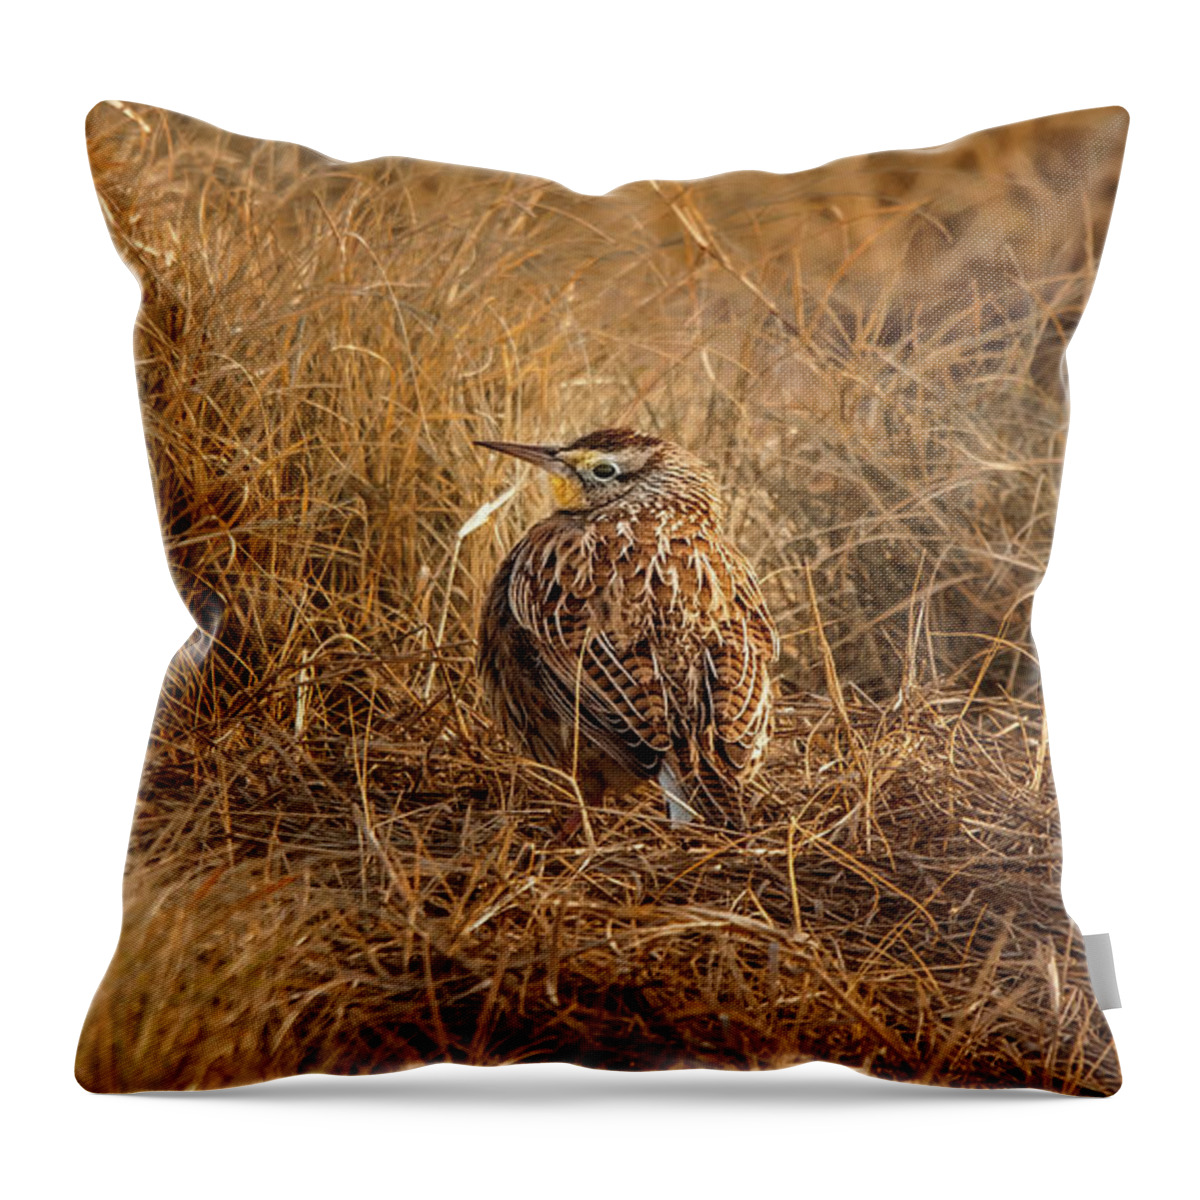 Animal Throw Pillow featuring the photograph Meadowlark Hiding In Grass by Robert Frederick